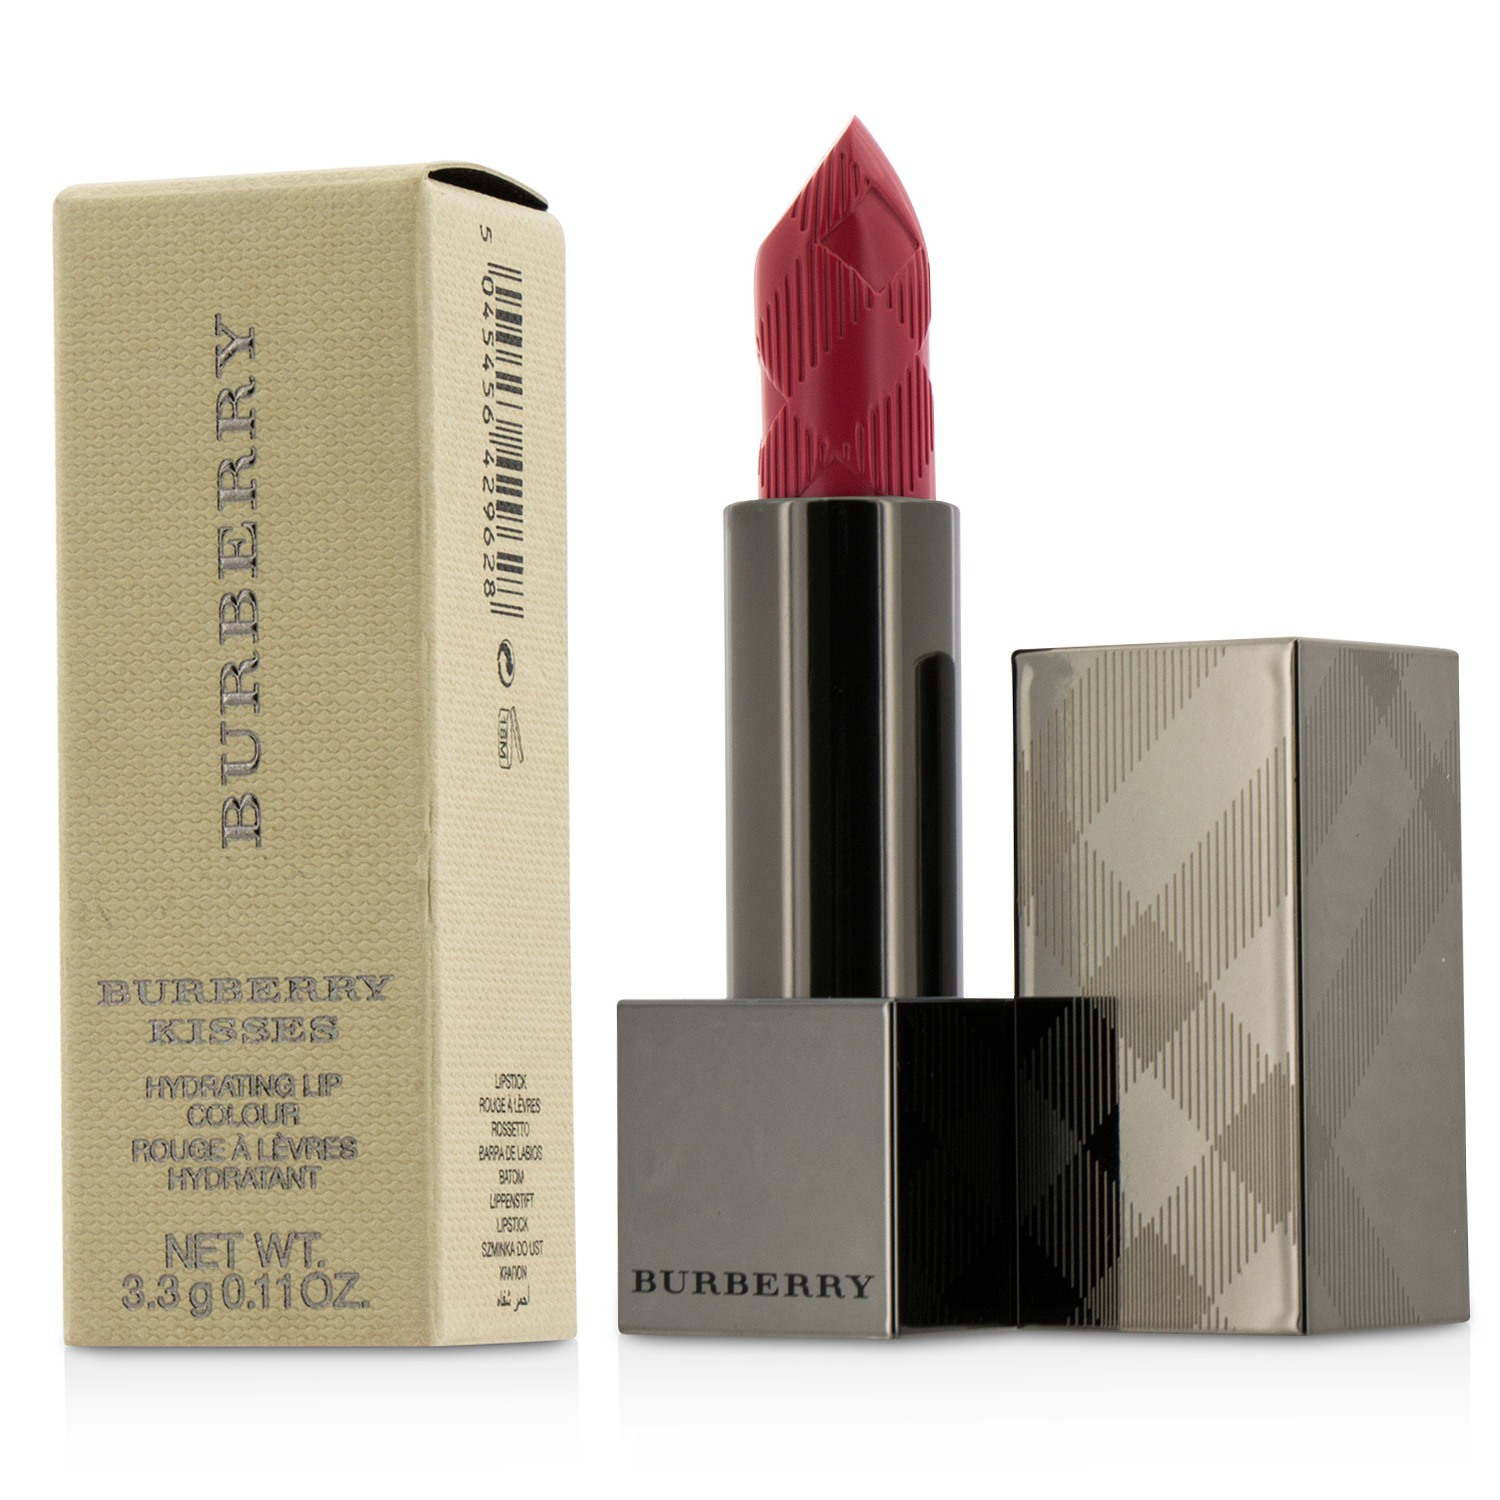 Burberry Kisses Hydrating Lip Colour - # No. 45 Claret Pink Burberry Image